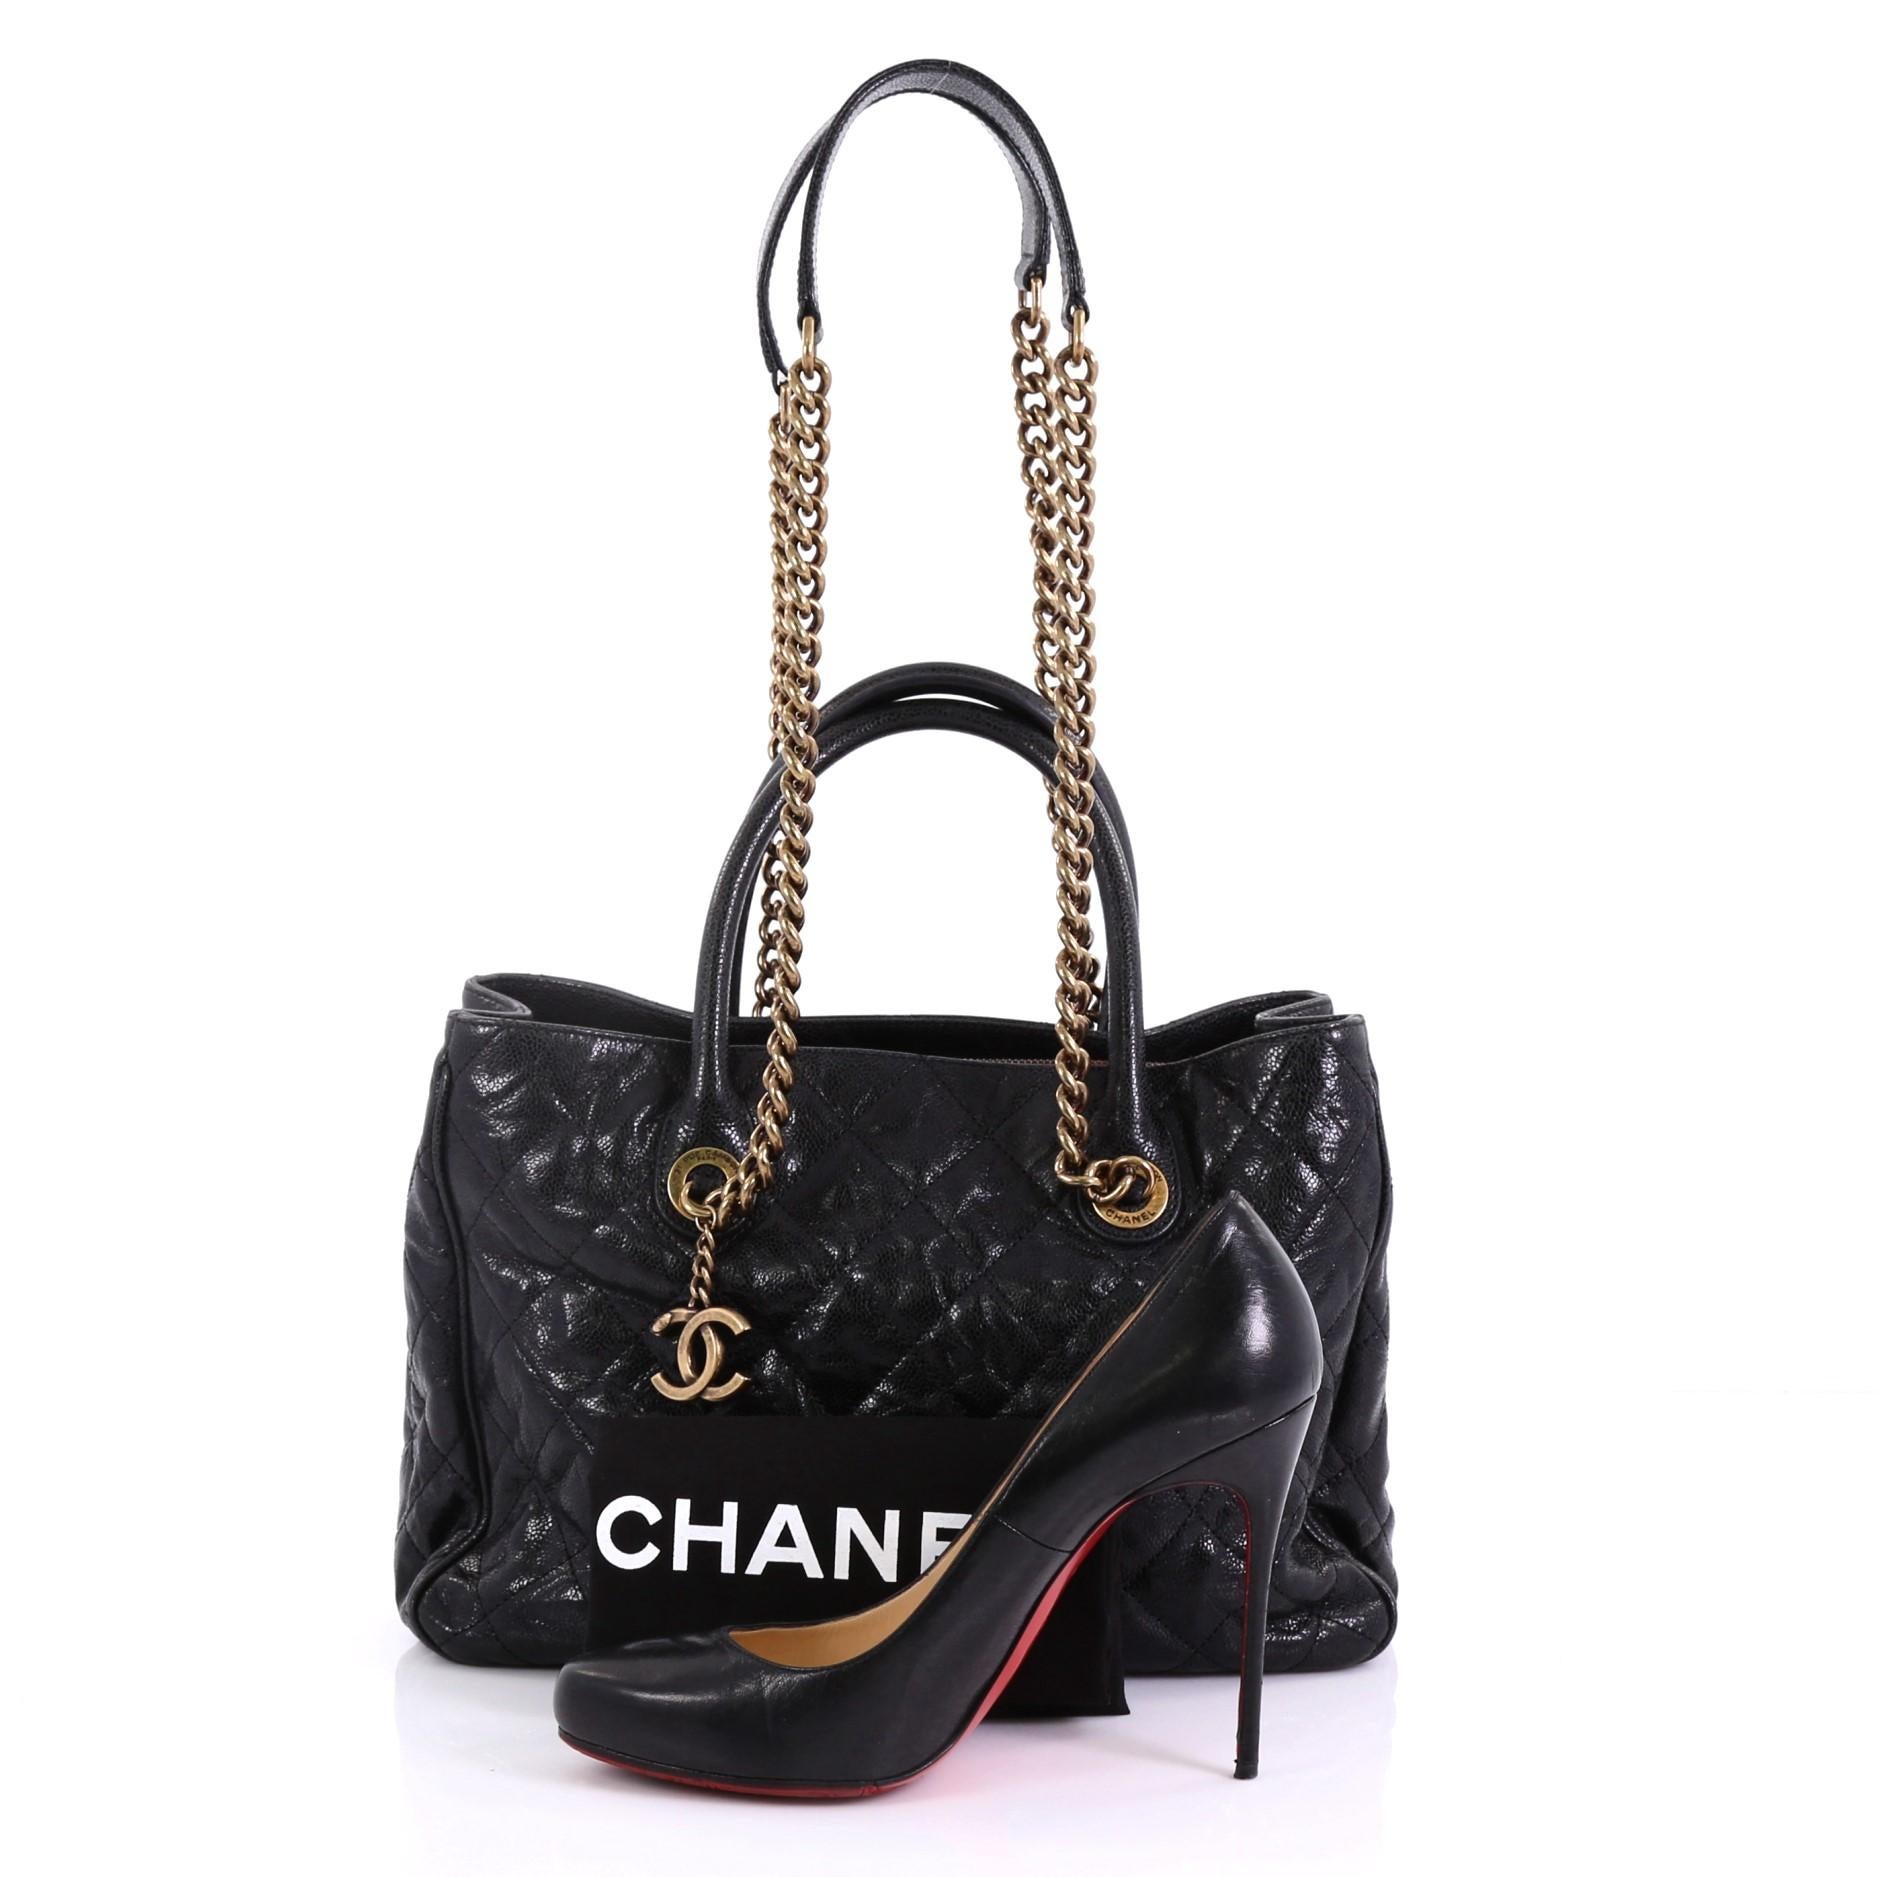 This Chanel Shiva Tote Quilted Caviar Medium, crafted from black quilted caviar leather, features dual rolled leather handles, chain link straps with shoulder pads, and aged gold-tone hardware. It opens to a burgundy fabric interior with middle zip